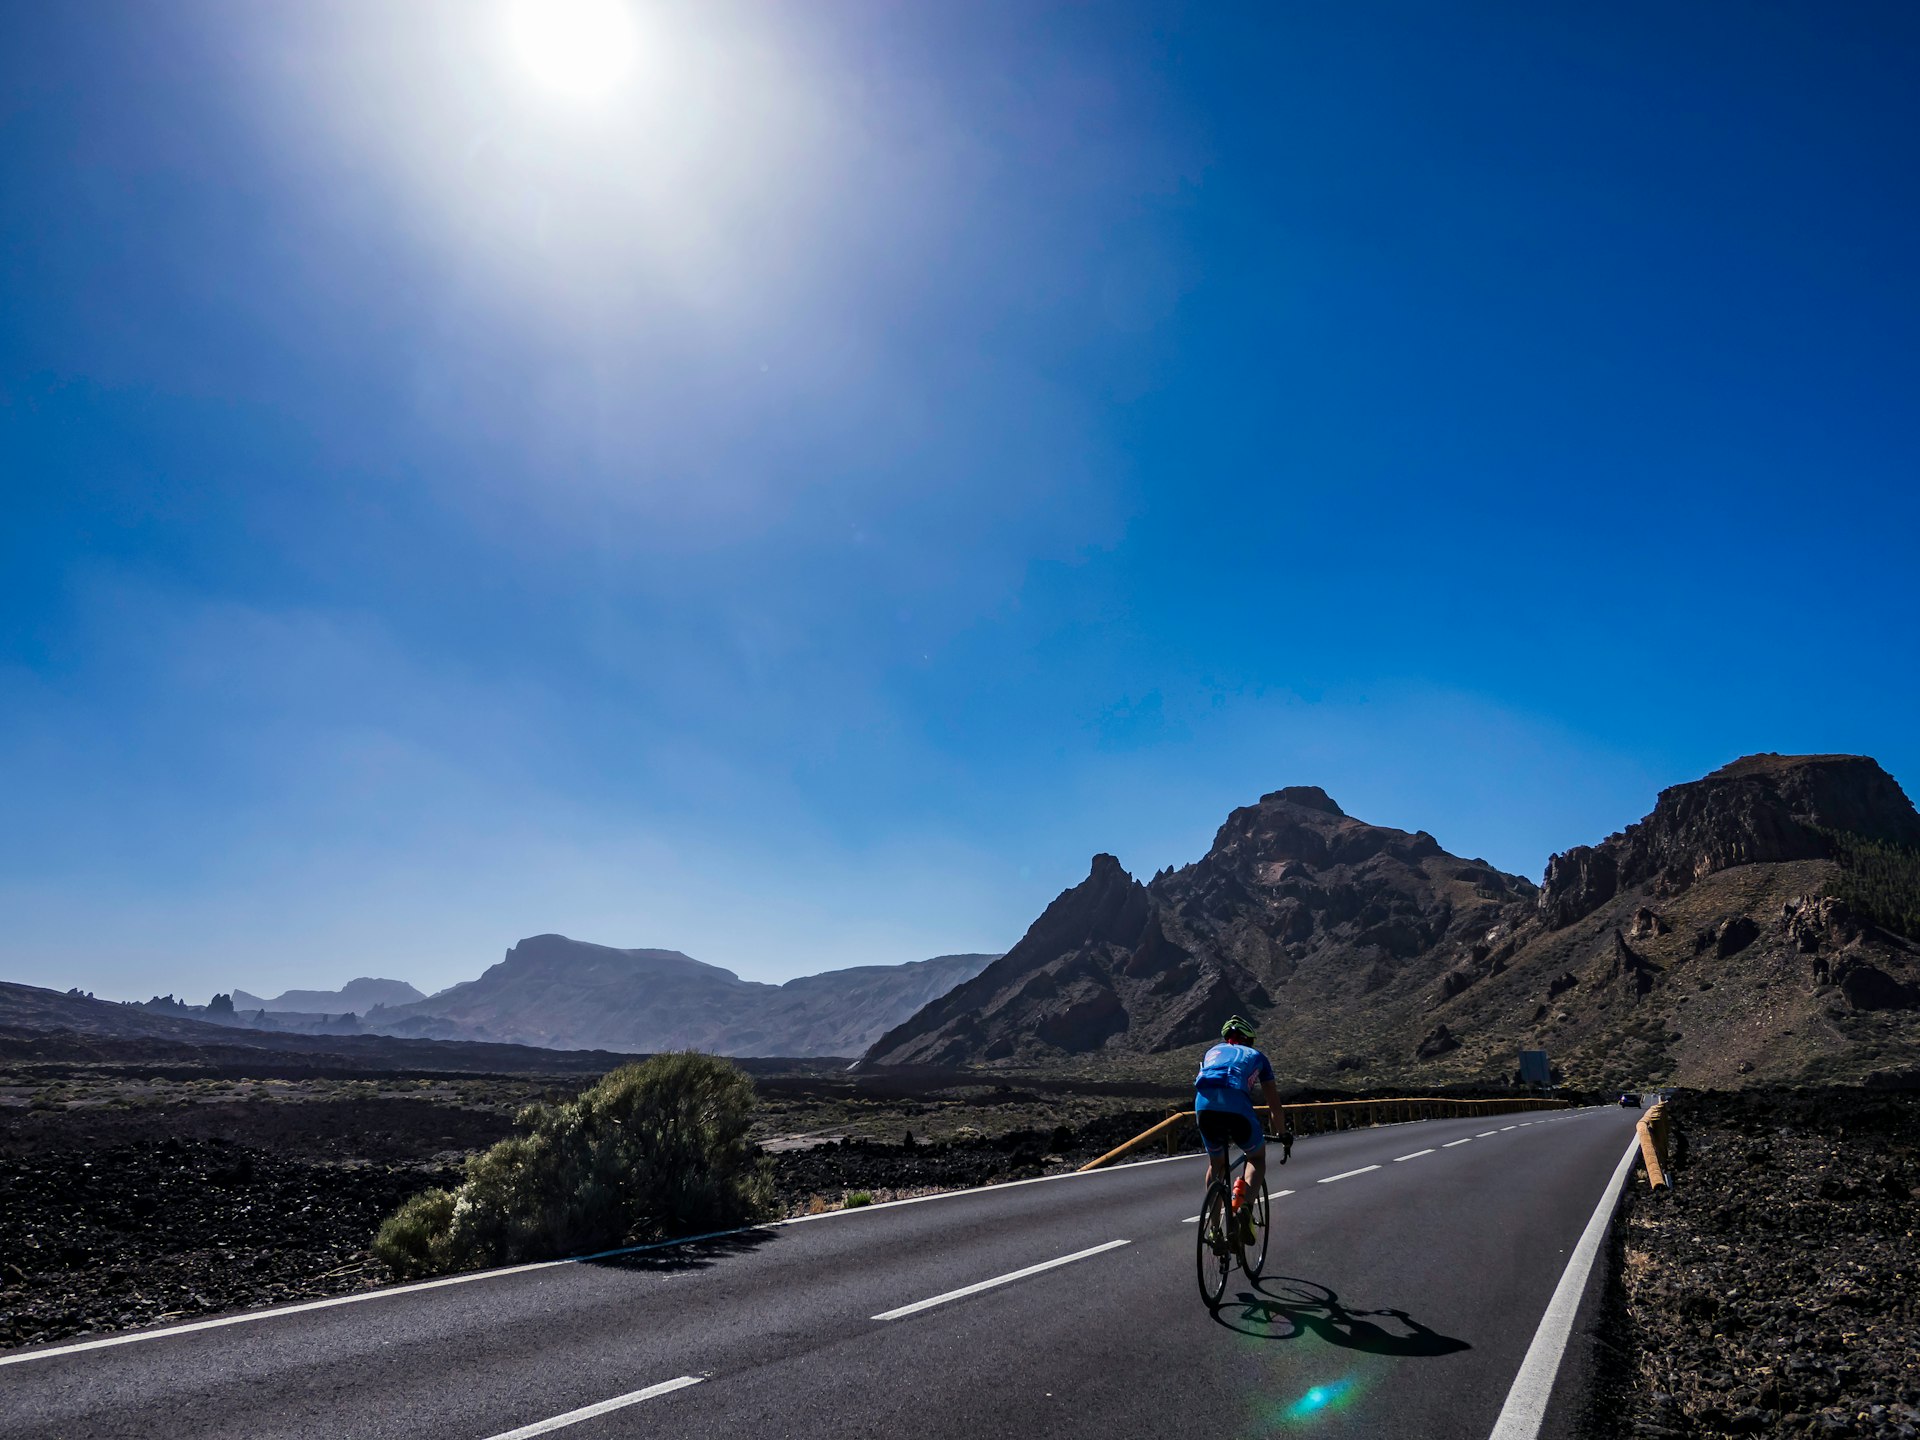 Cyclist riding on a road with the sun beating down, through the volcanic landscape of Teide National Park in Tenerife